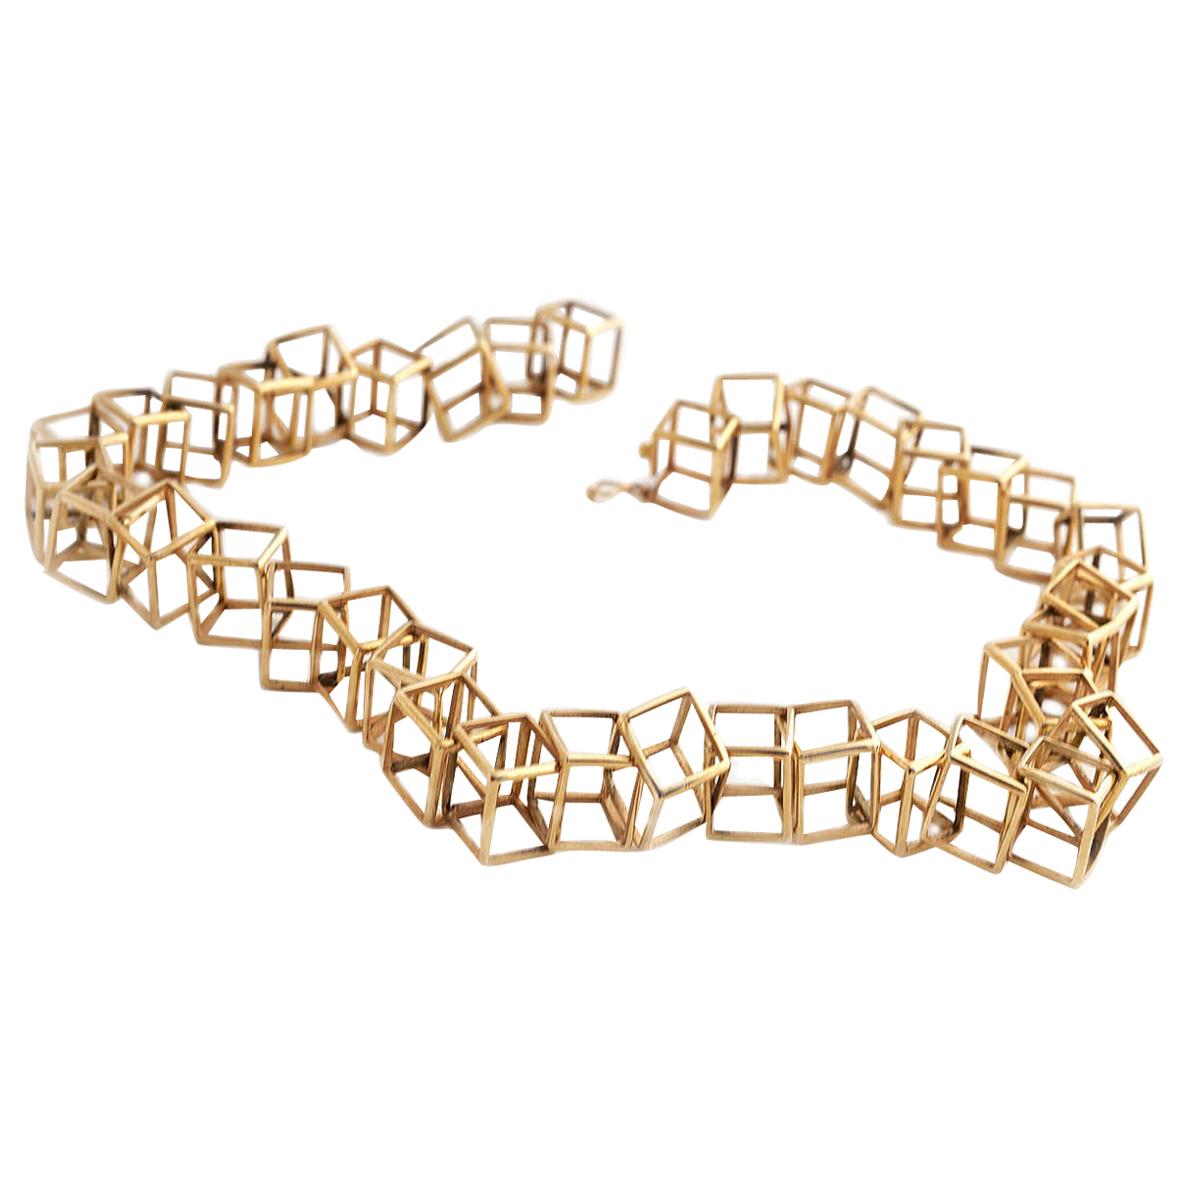  18 Karat Yellow Gold, Hollow Geometric Cubes, Statement collier, For Sale